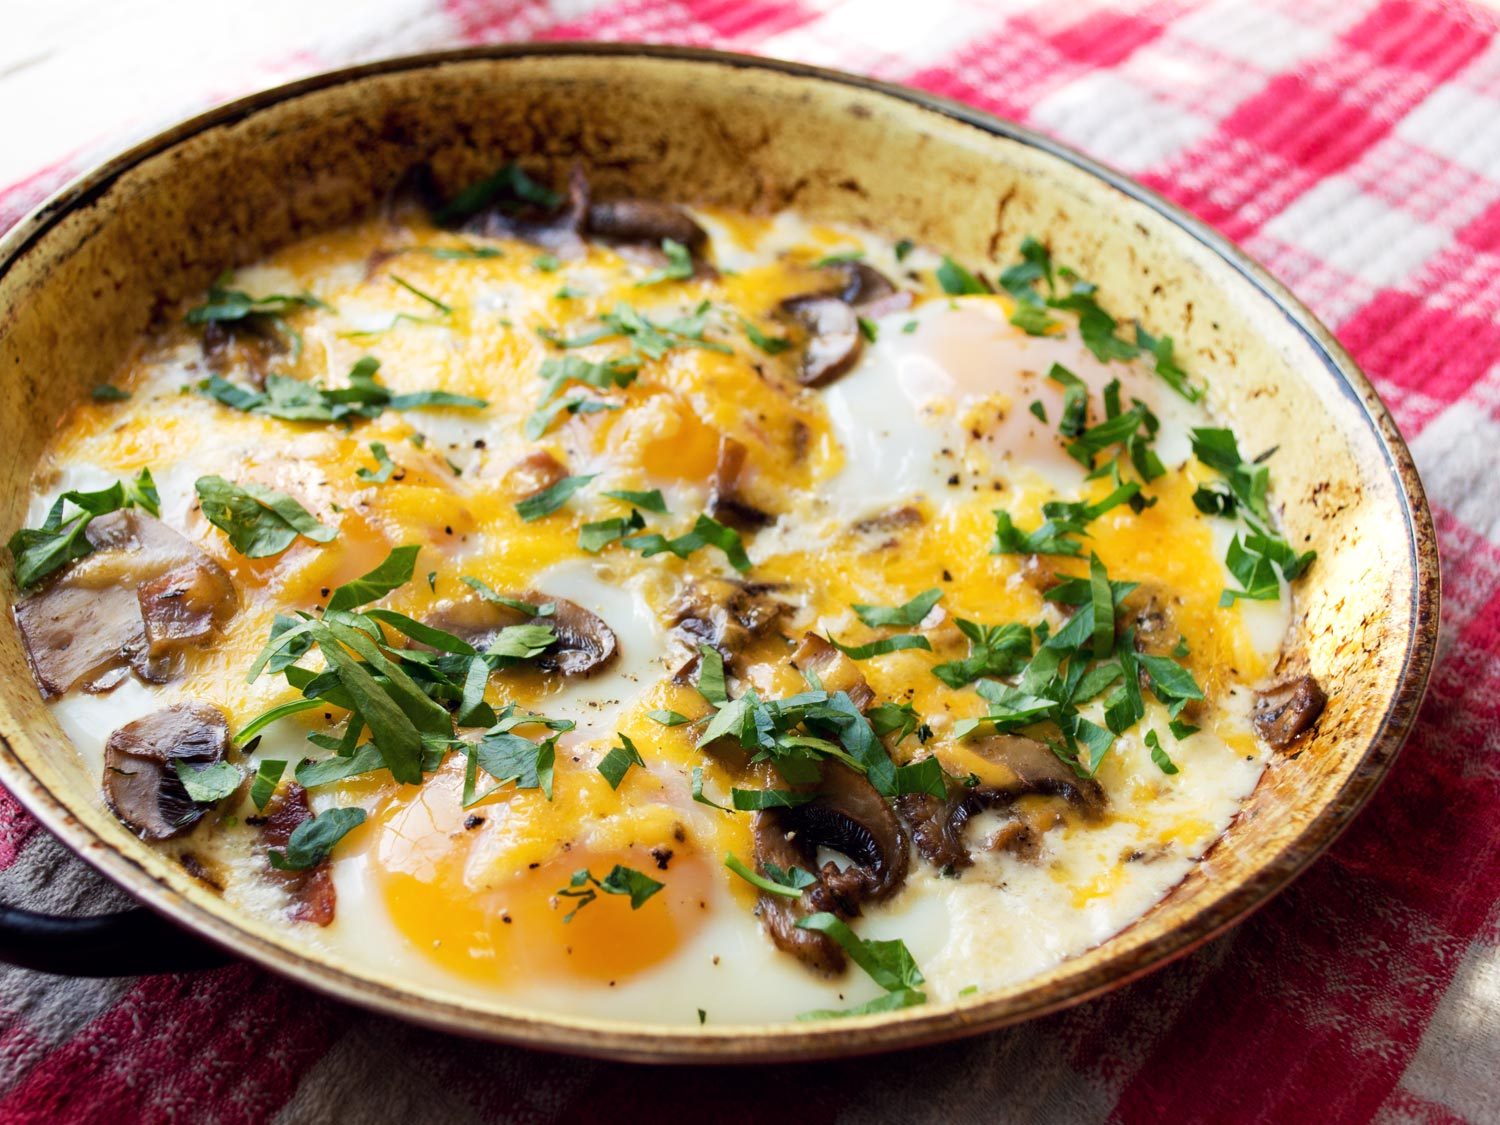 Baked Eggs With Mushrooms, Cheddar, and Ham Recipe